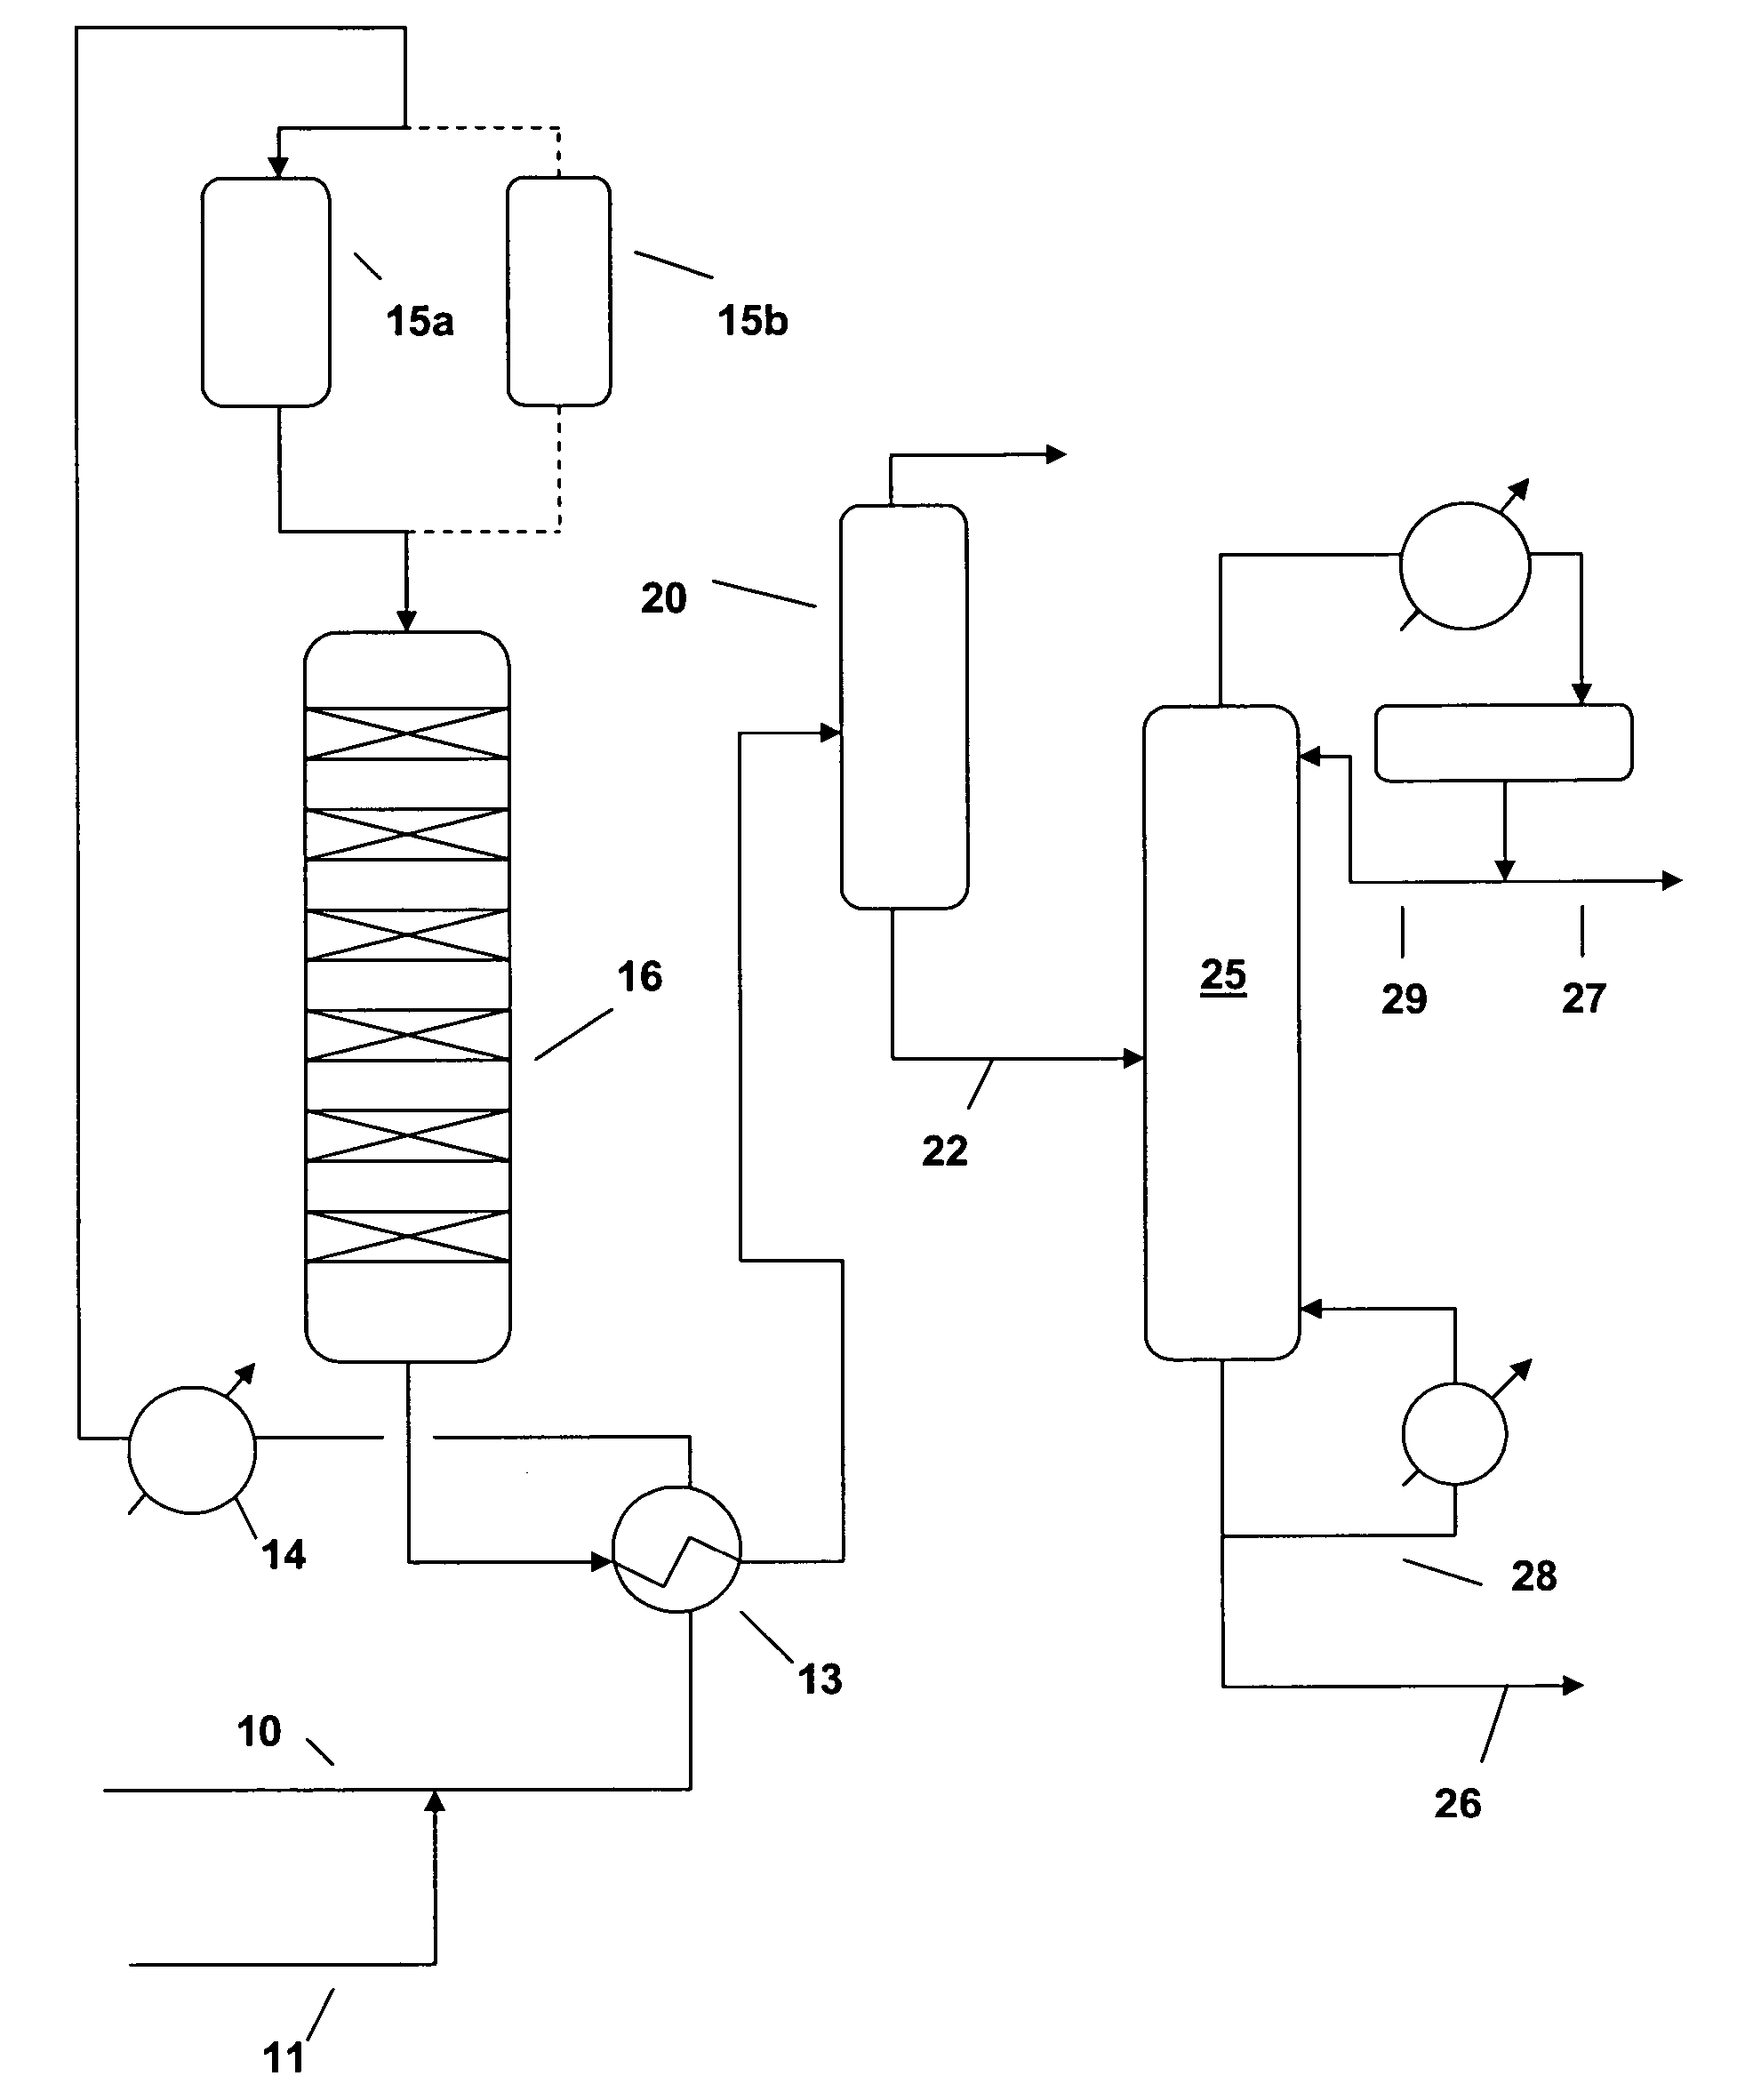 Process for making high octane gasoline with reduced benzene content